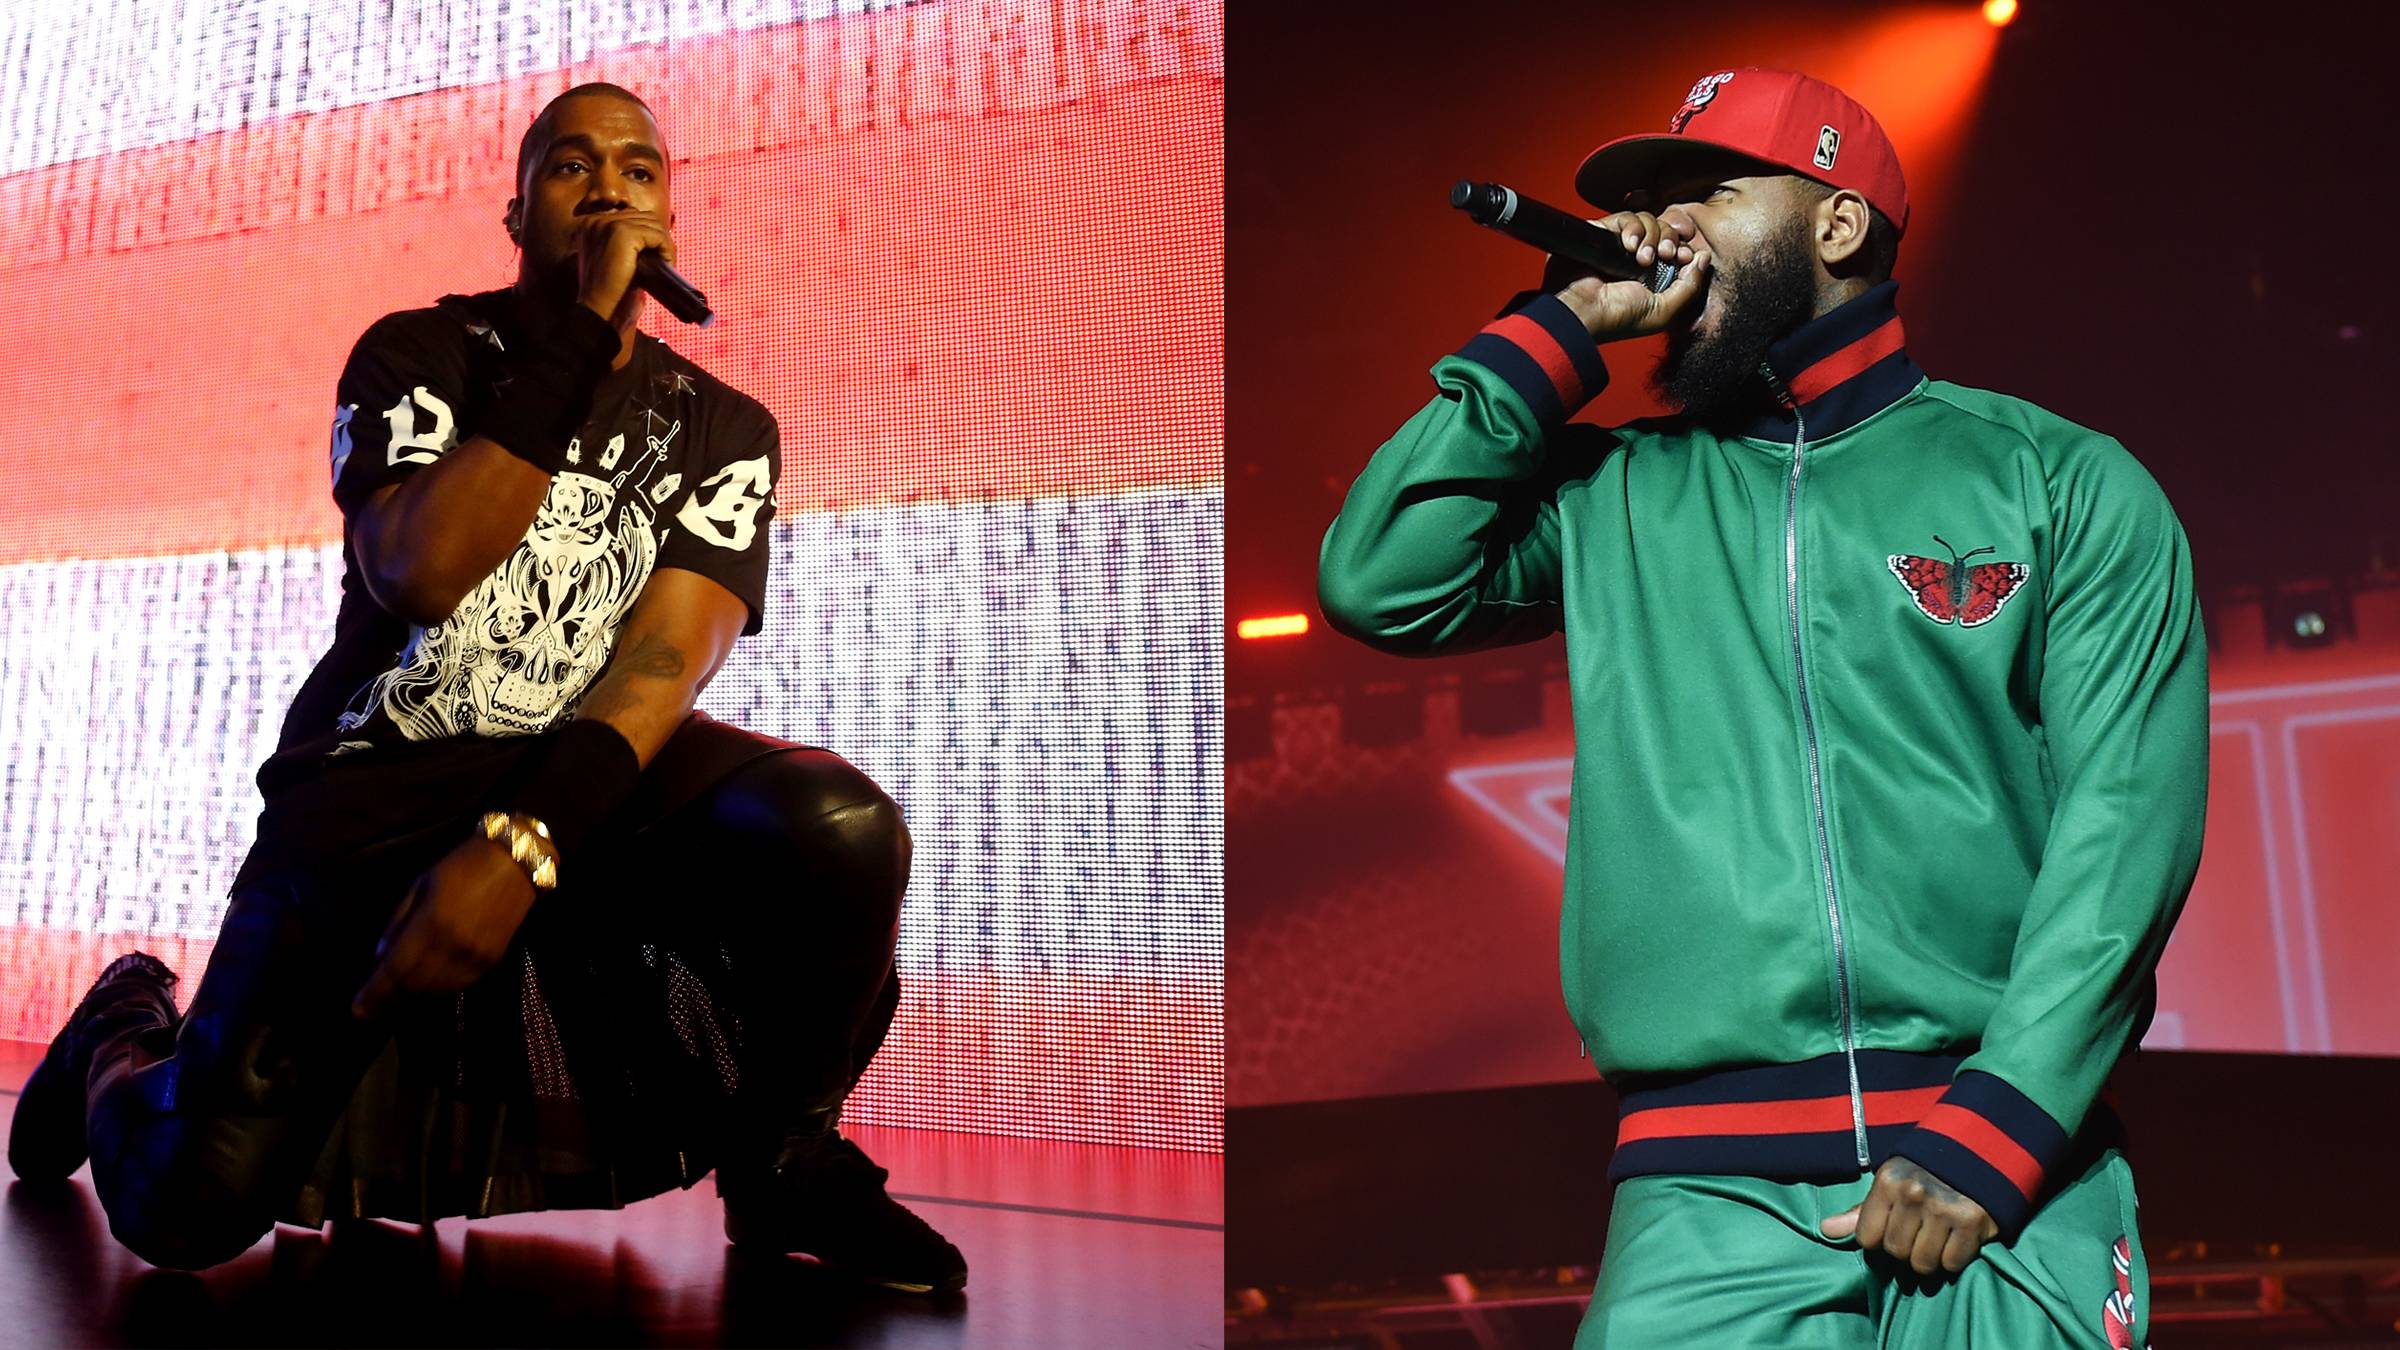 Listen to Kanye West and The Game's “Eazy”